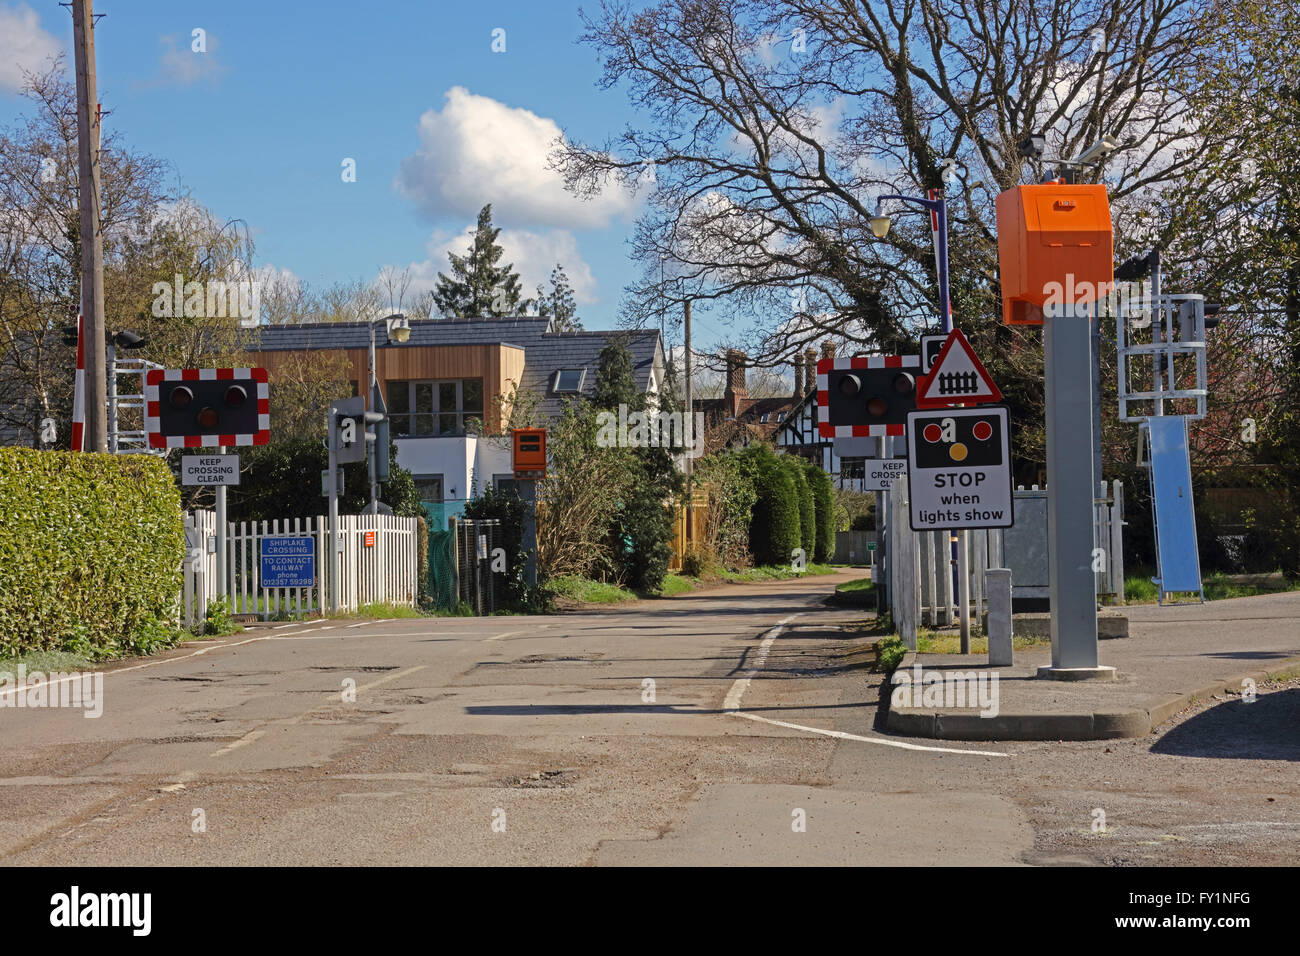 An automatic half barrier level crossing in a rural location with much signage and enforcements camera's on either side. Stock Photo